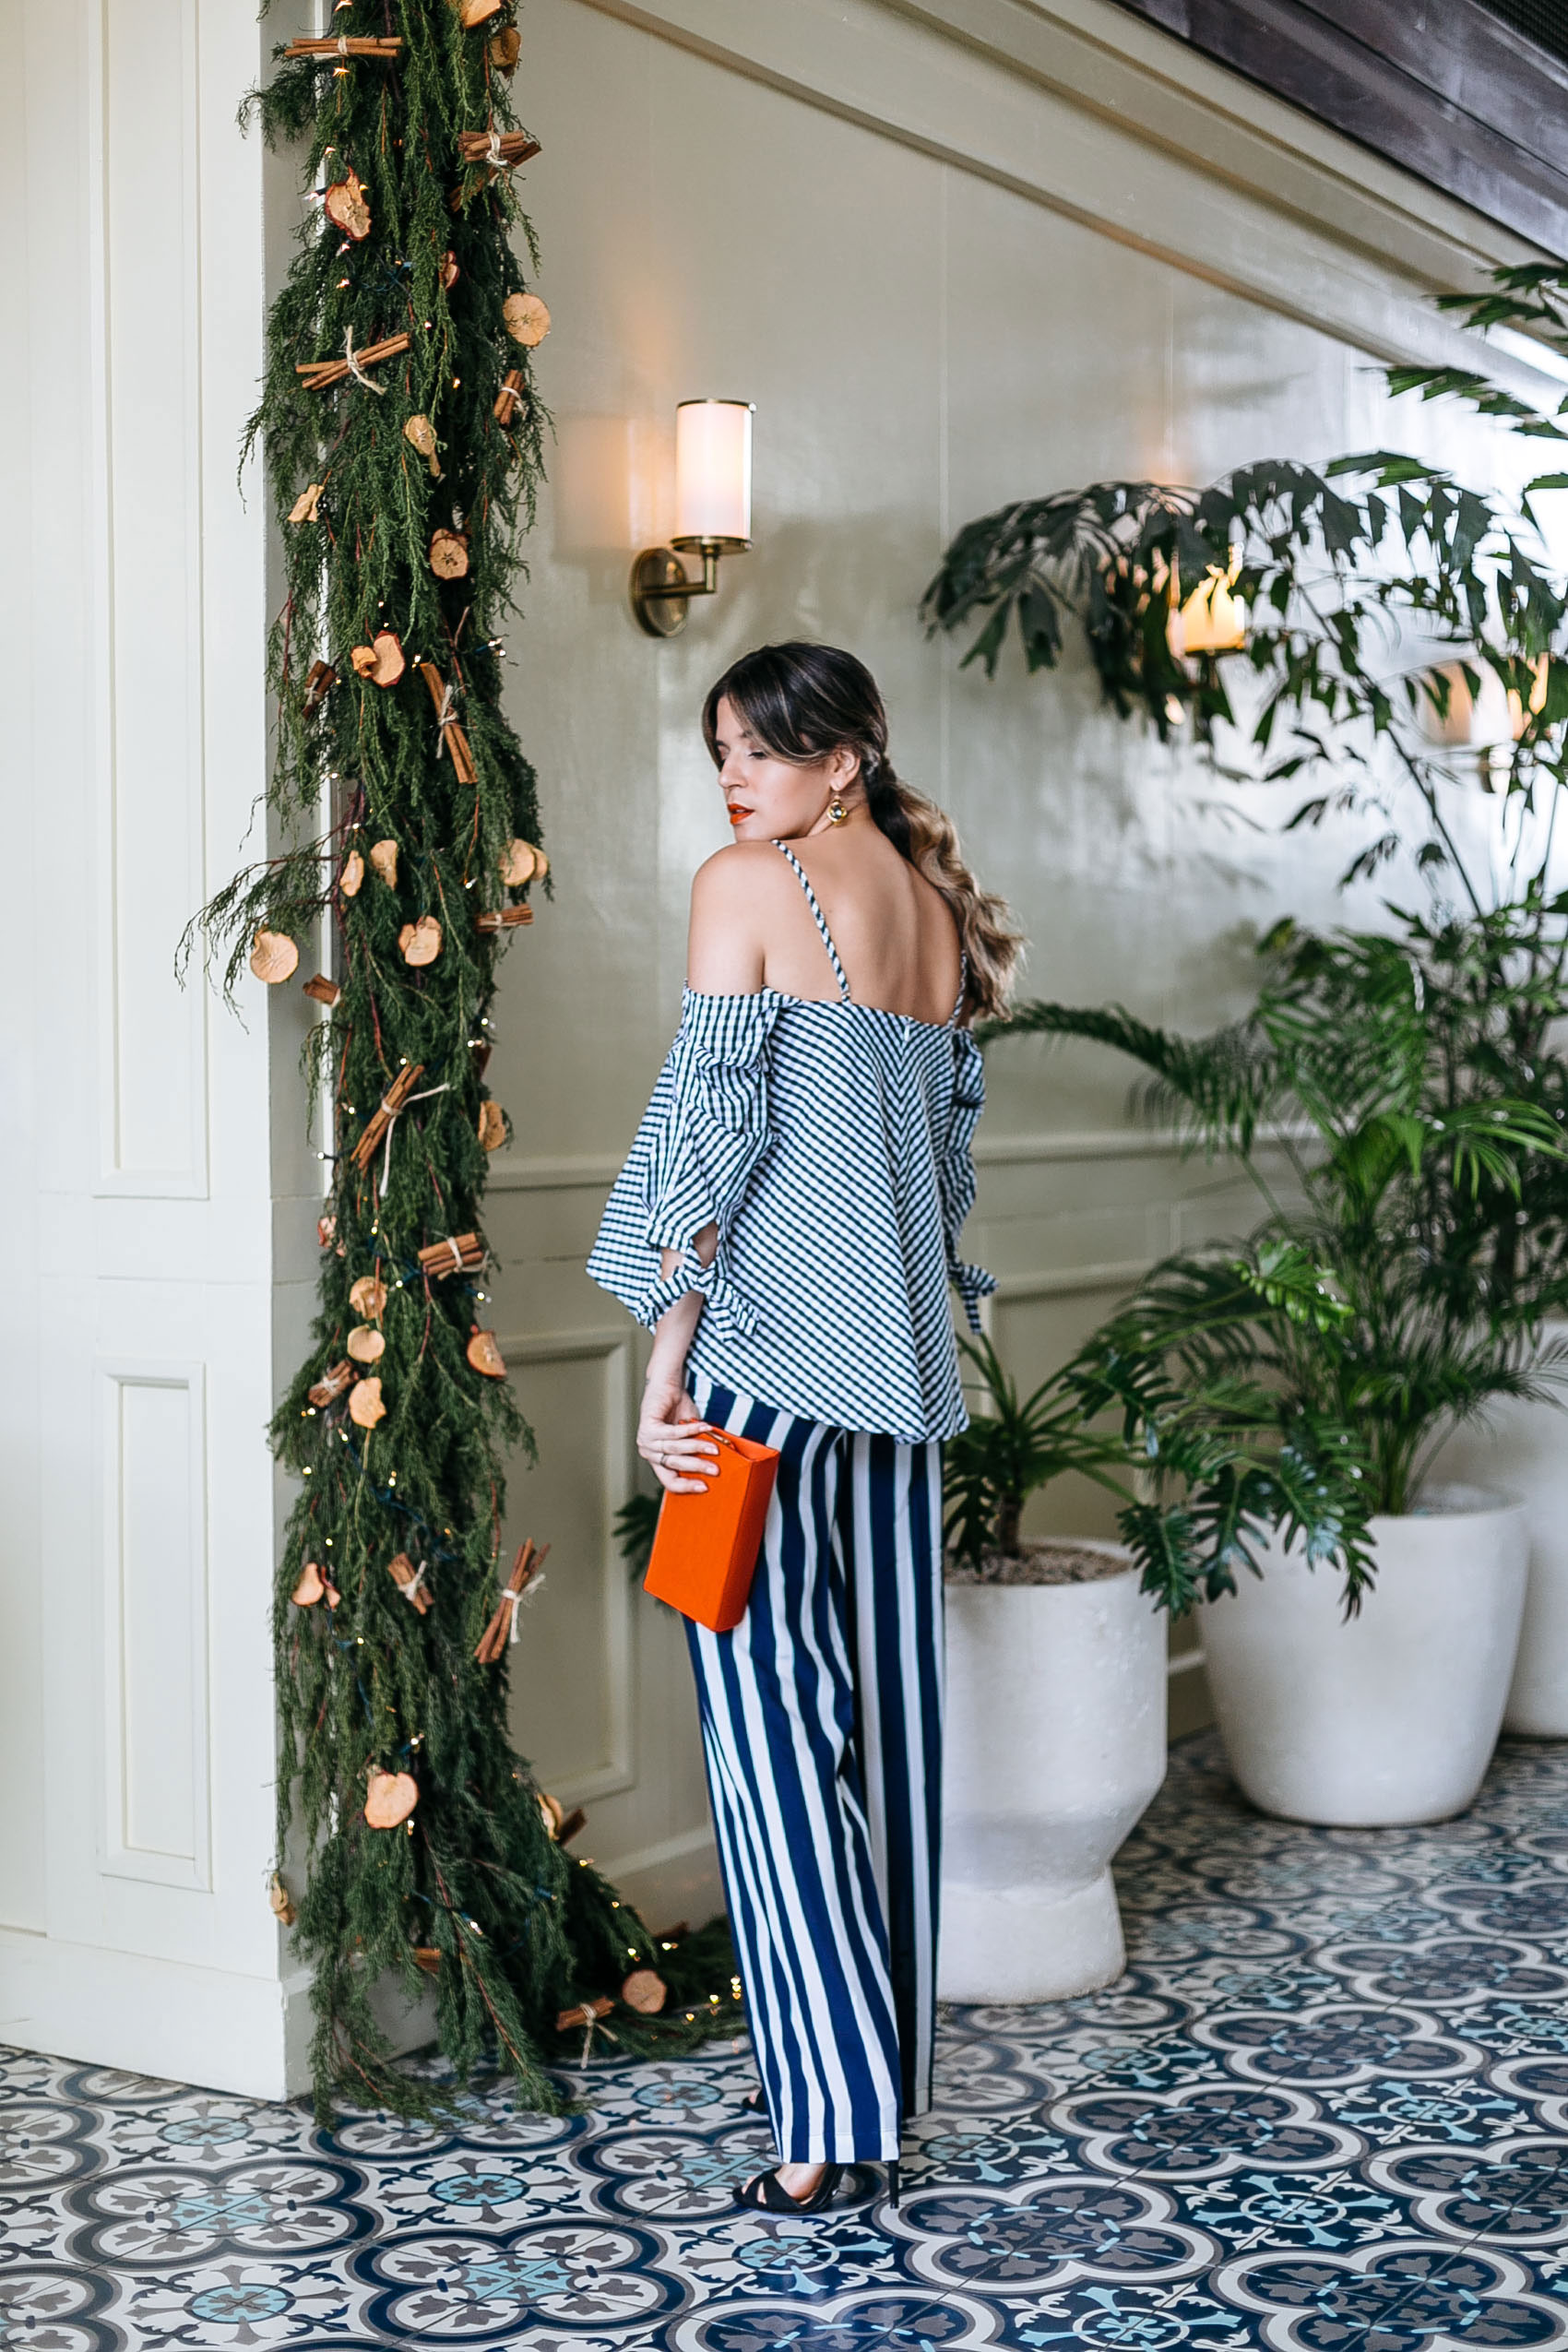 Maristella shows off her eclectic holiday print mixing with gingham and stripes